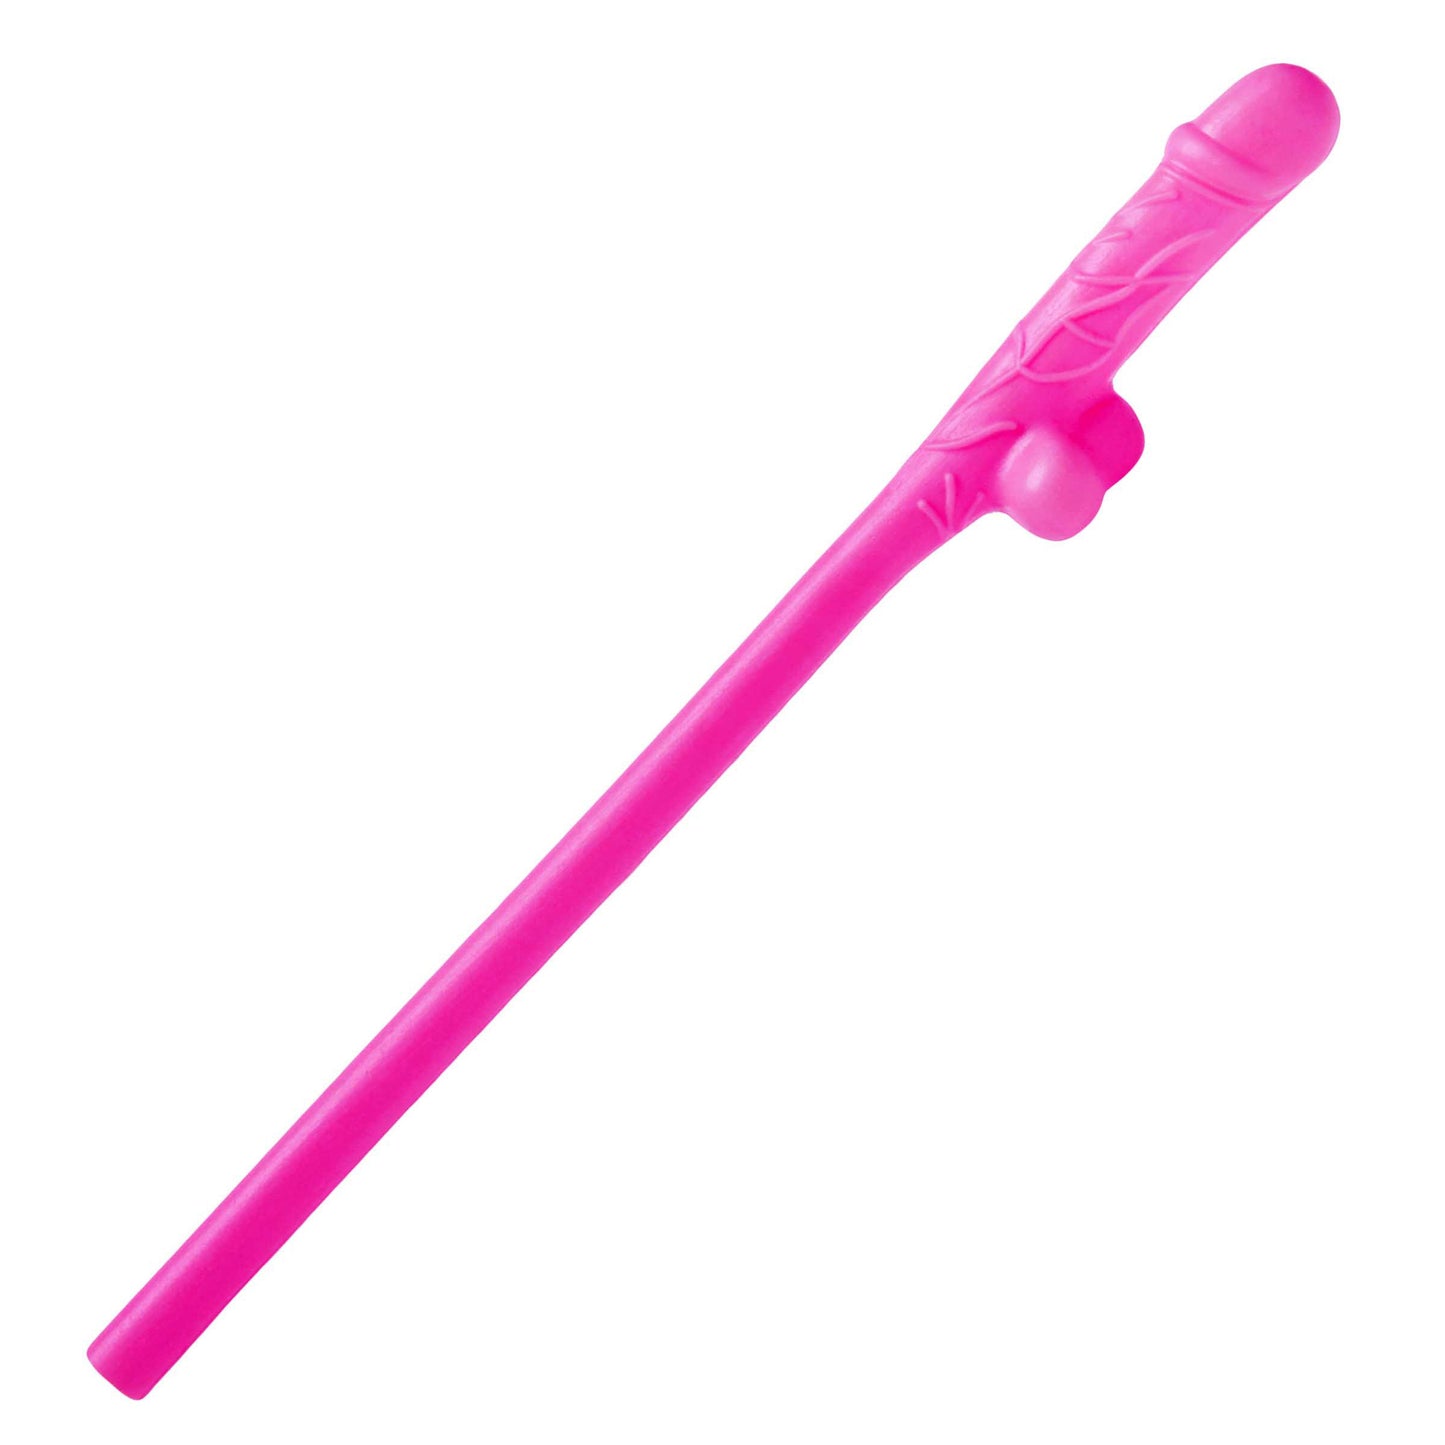 Penis Sipping Straws 10 Pack - Pink - UABDSM